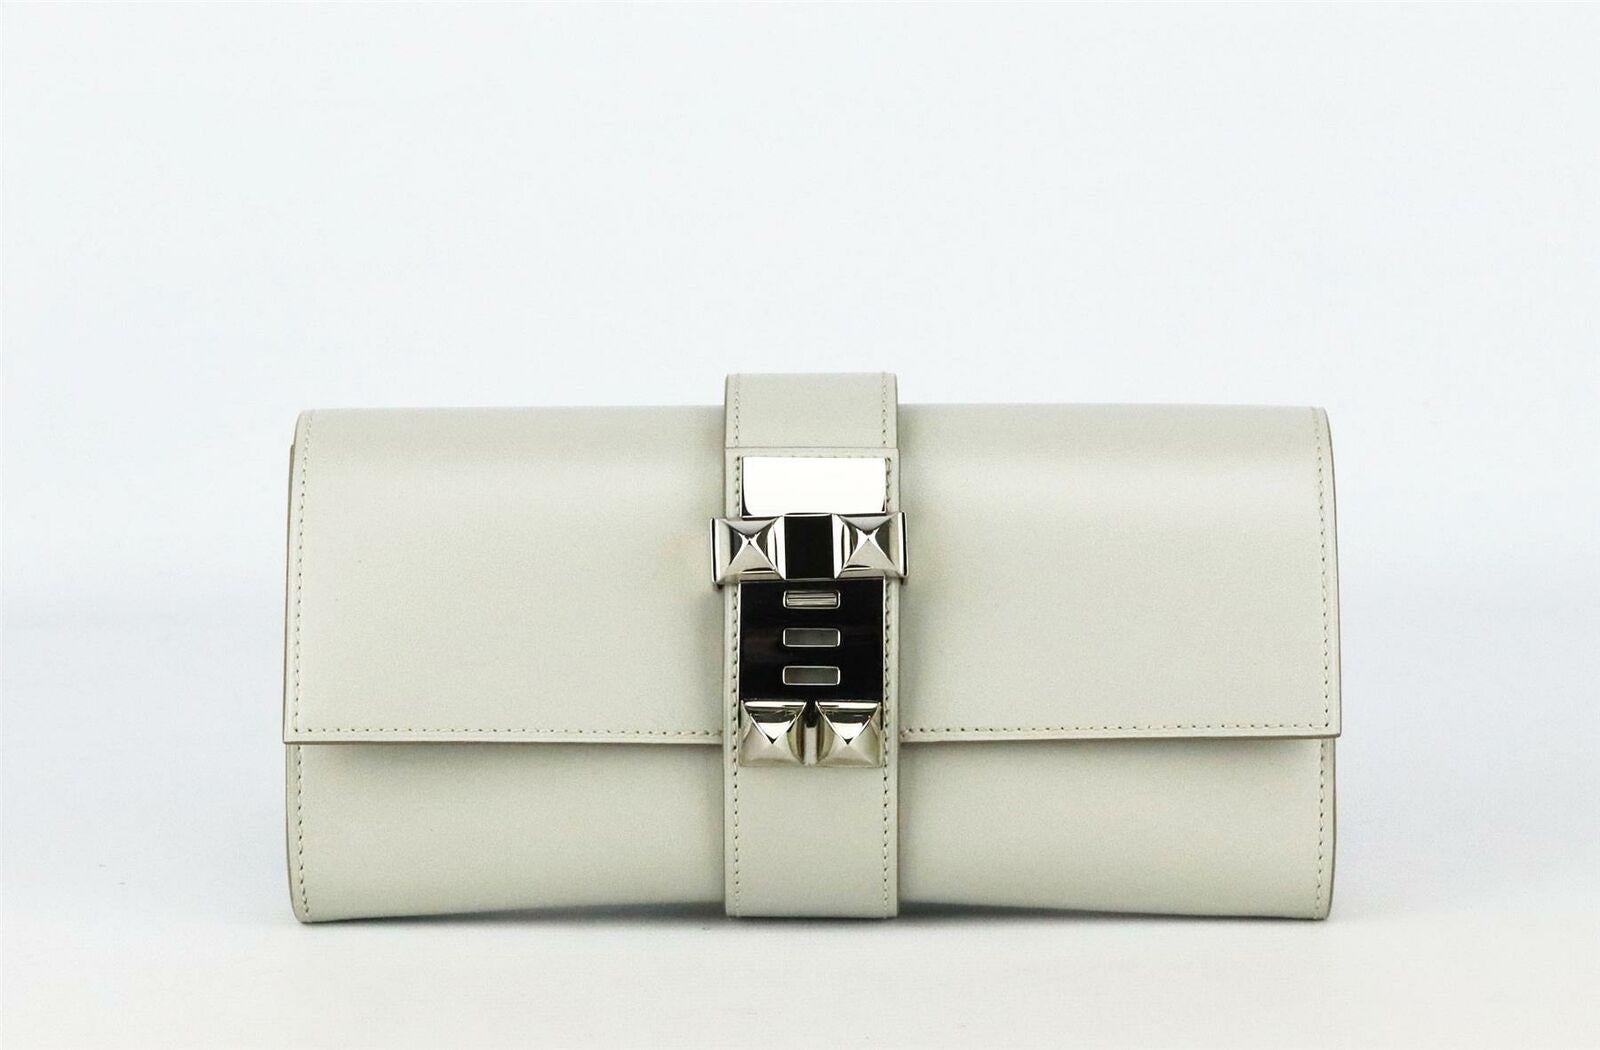 Made in France, this beautiful 2013 Hermès ‘Medor’ 23cm clutch has been made from ‘Tadelakt’ leather exterior in ‘Gris Perle’ a grey hue and matching leather interior, it is decorated with palladium hardware with the clutch’s iconic studded plate on